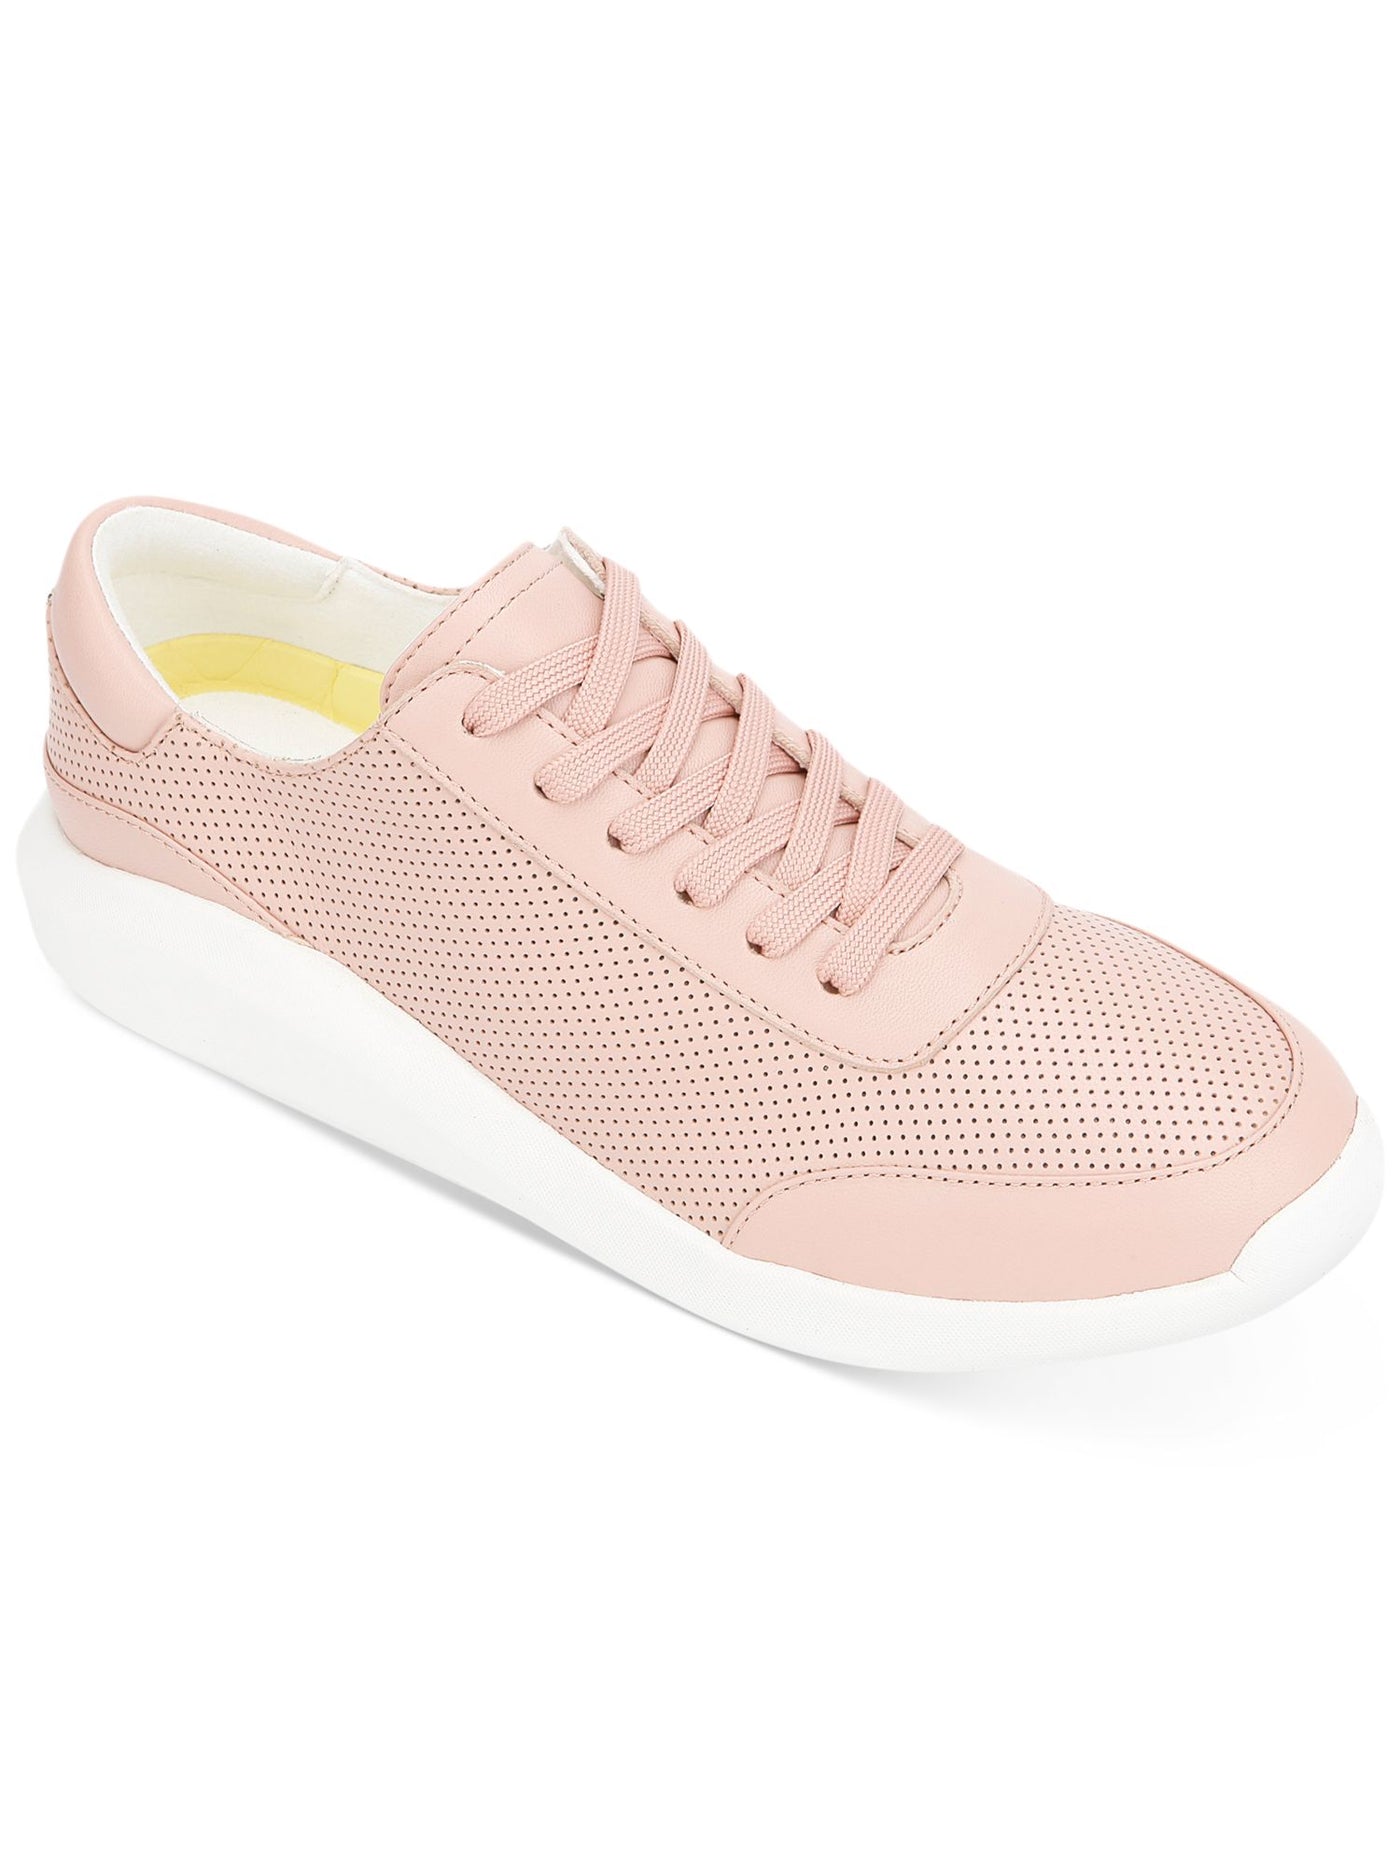 KENNETH COLE Womens Pink Metalic Accent In Back Cushioned Perforated Mello Round Toe Slip On Athletic Sneakers Shoes 8.5 M